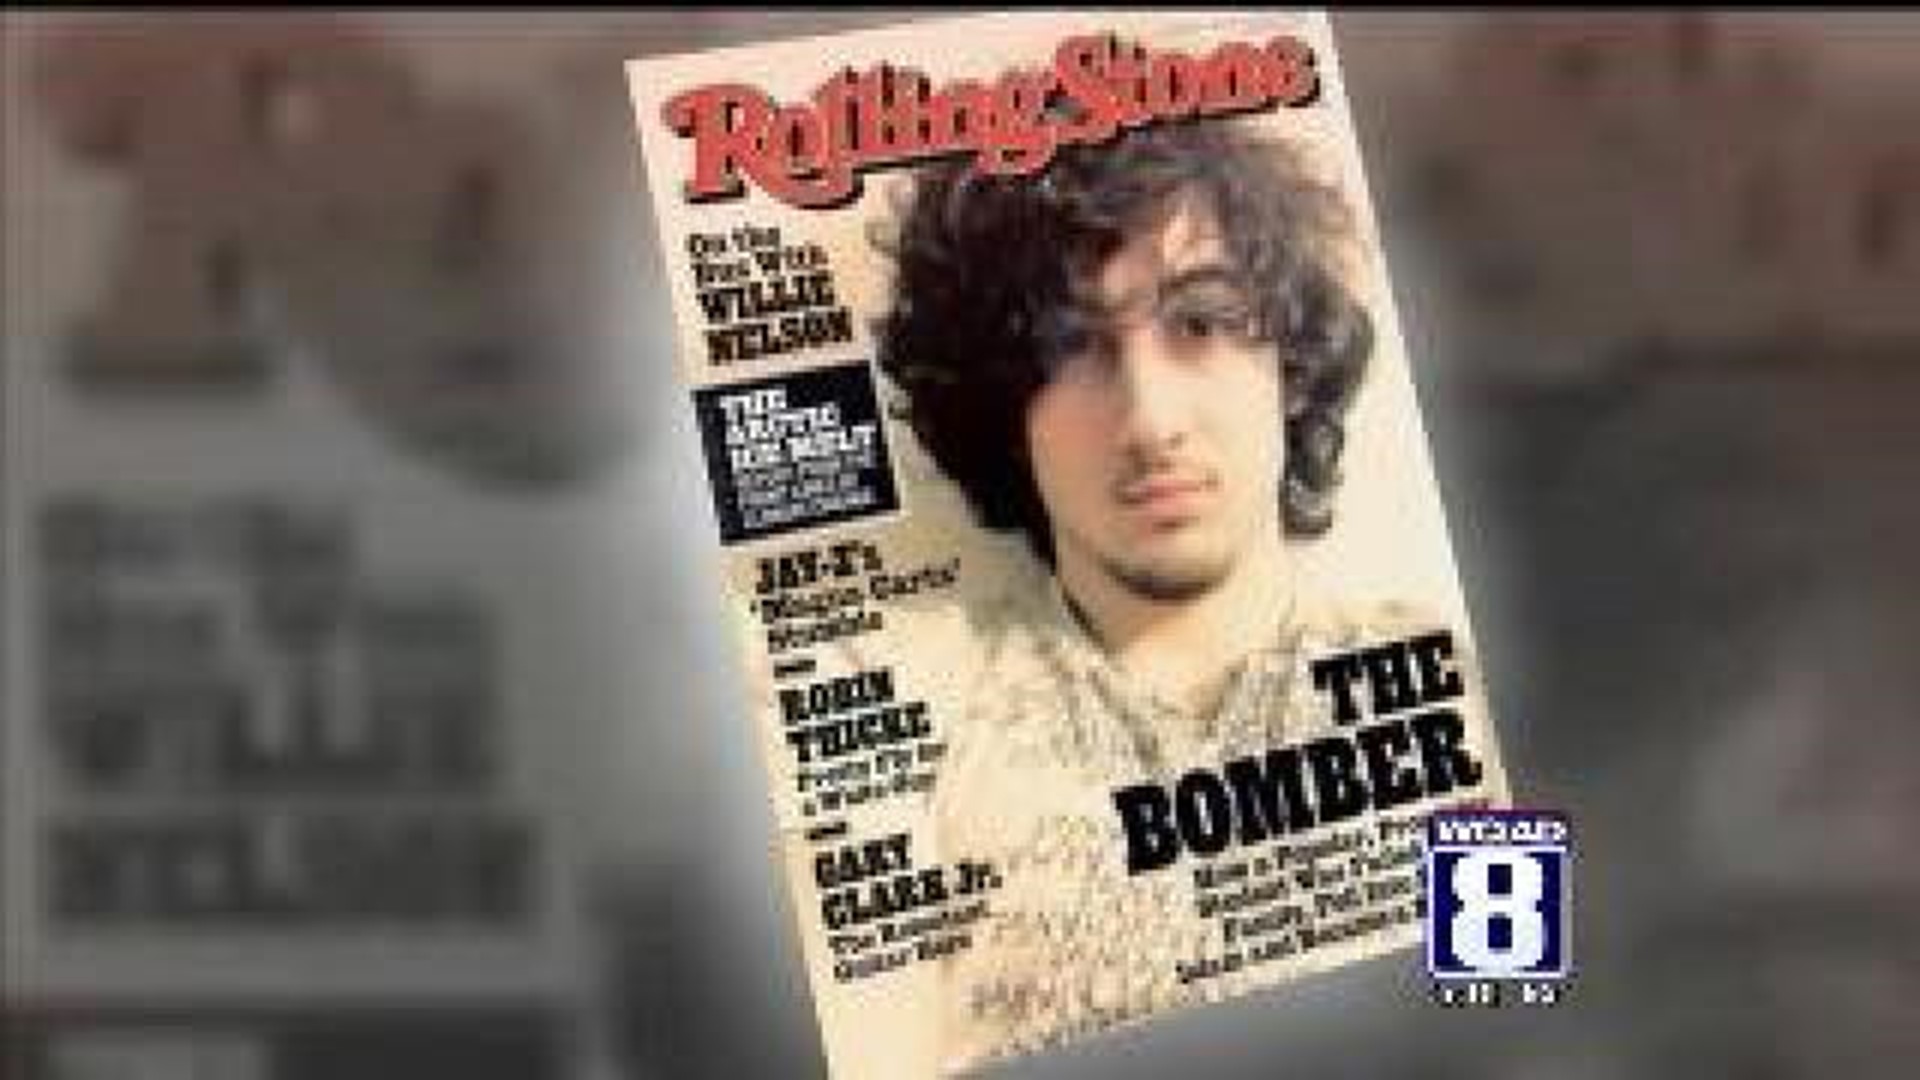 Rolling Stone places Boston Bombing suspect on magazine cover